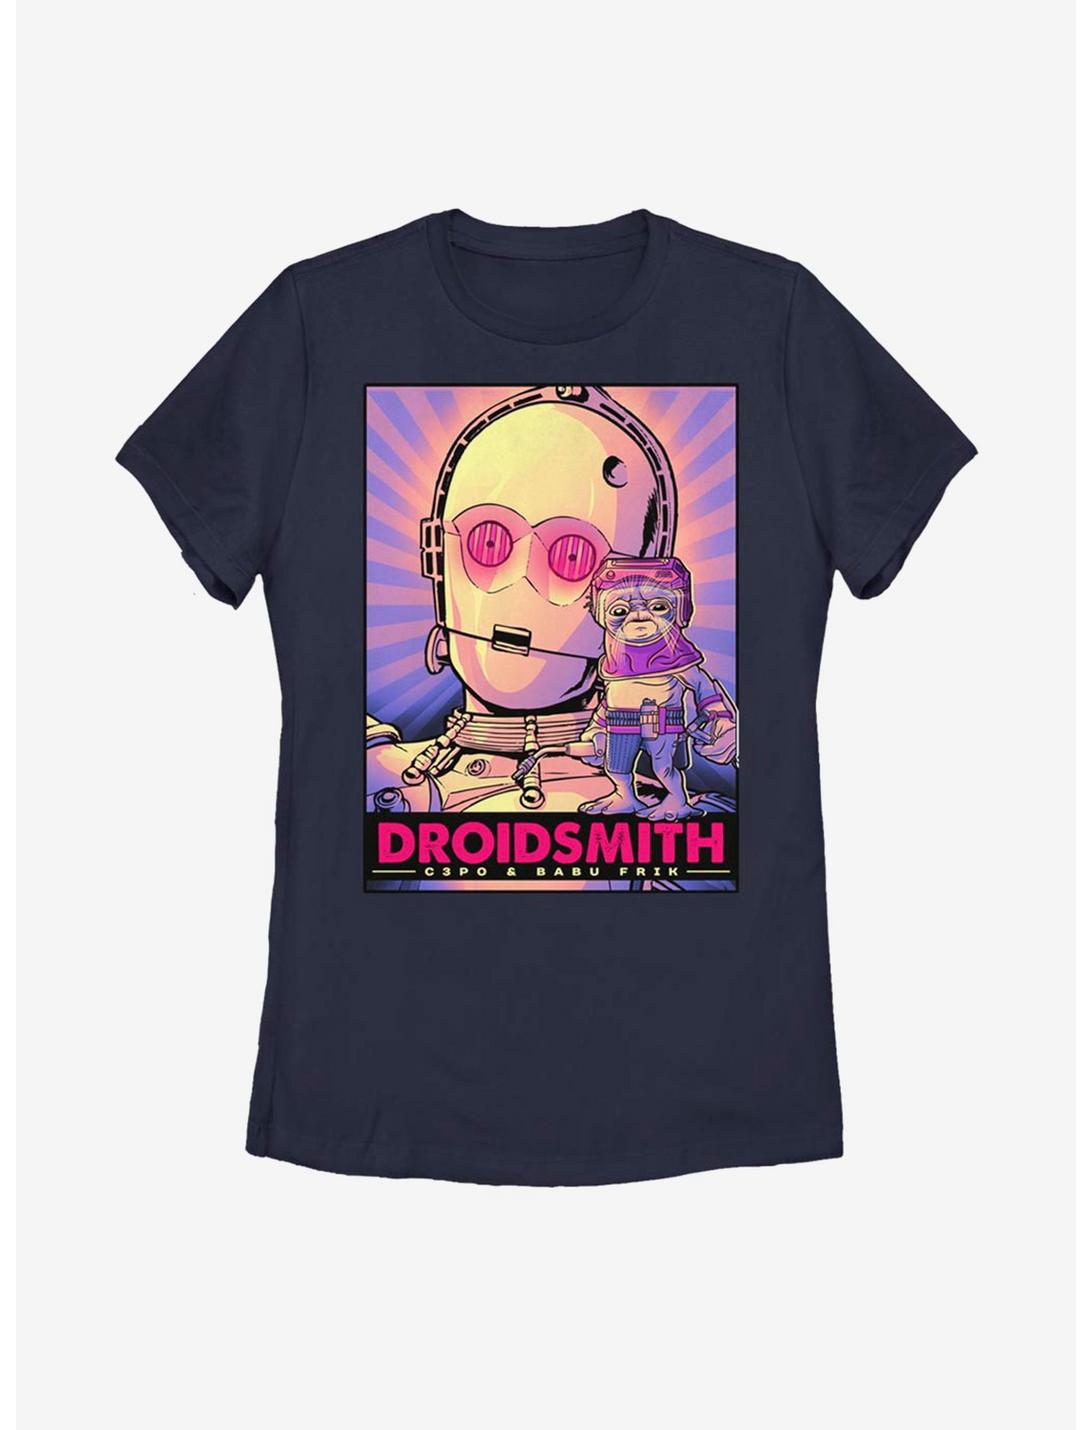 Star Wars Episode IX The Rise Of Skywalker Droid Smith C3PO Womens T-Shirt, NAVY, hi-res